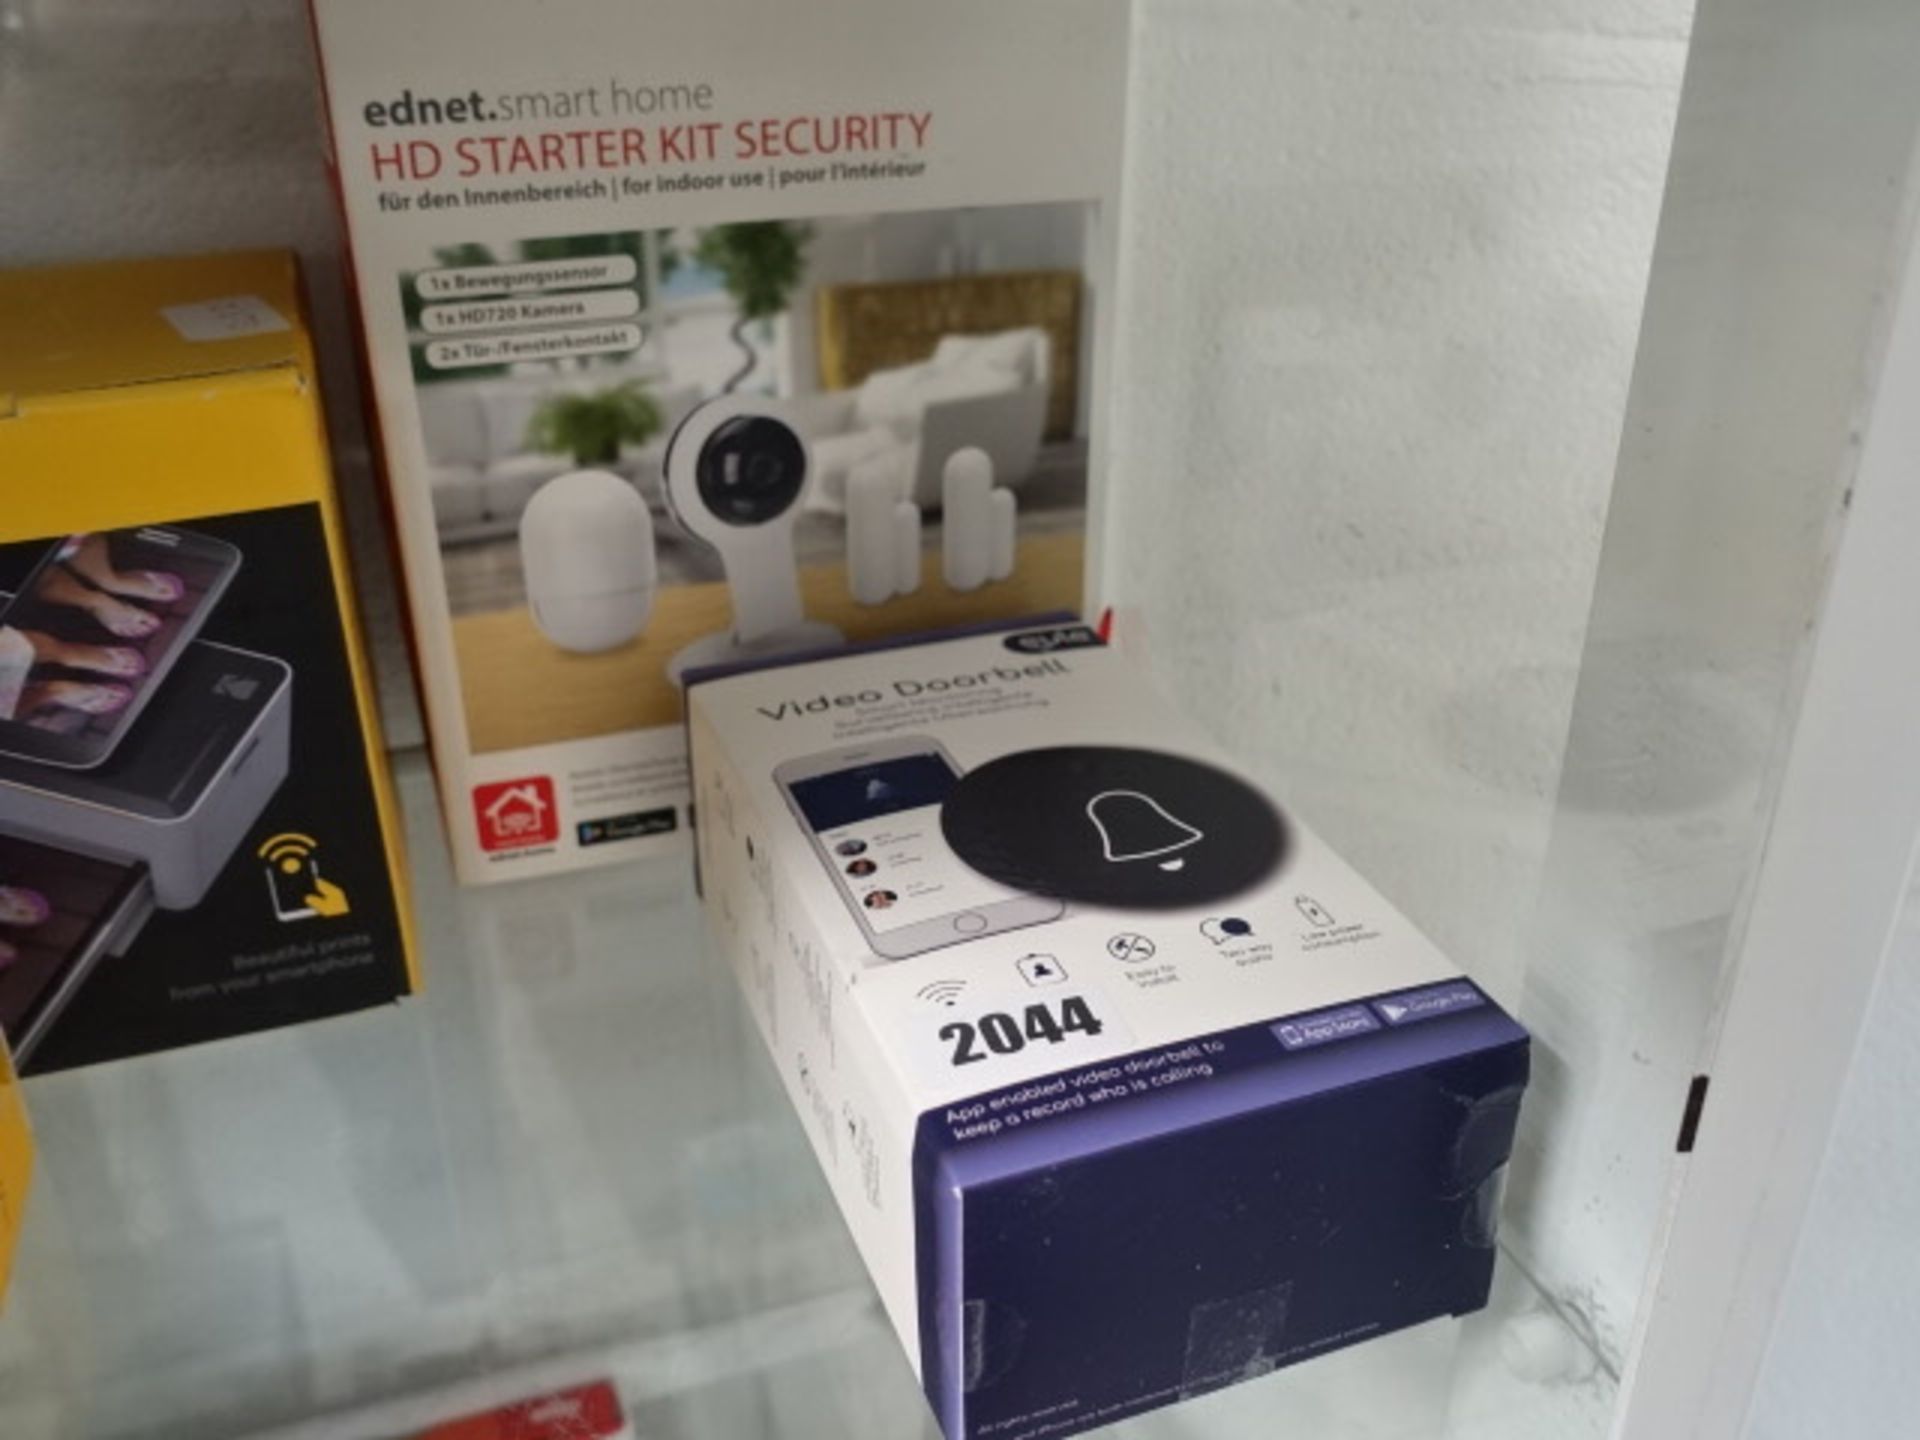 Video doorbell surveillance system together with an ED Net Smart Home starter security kit